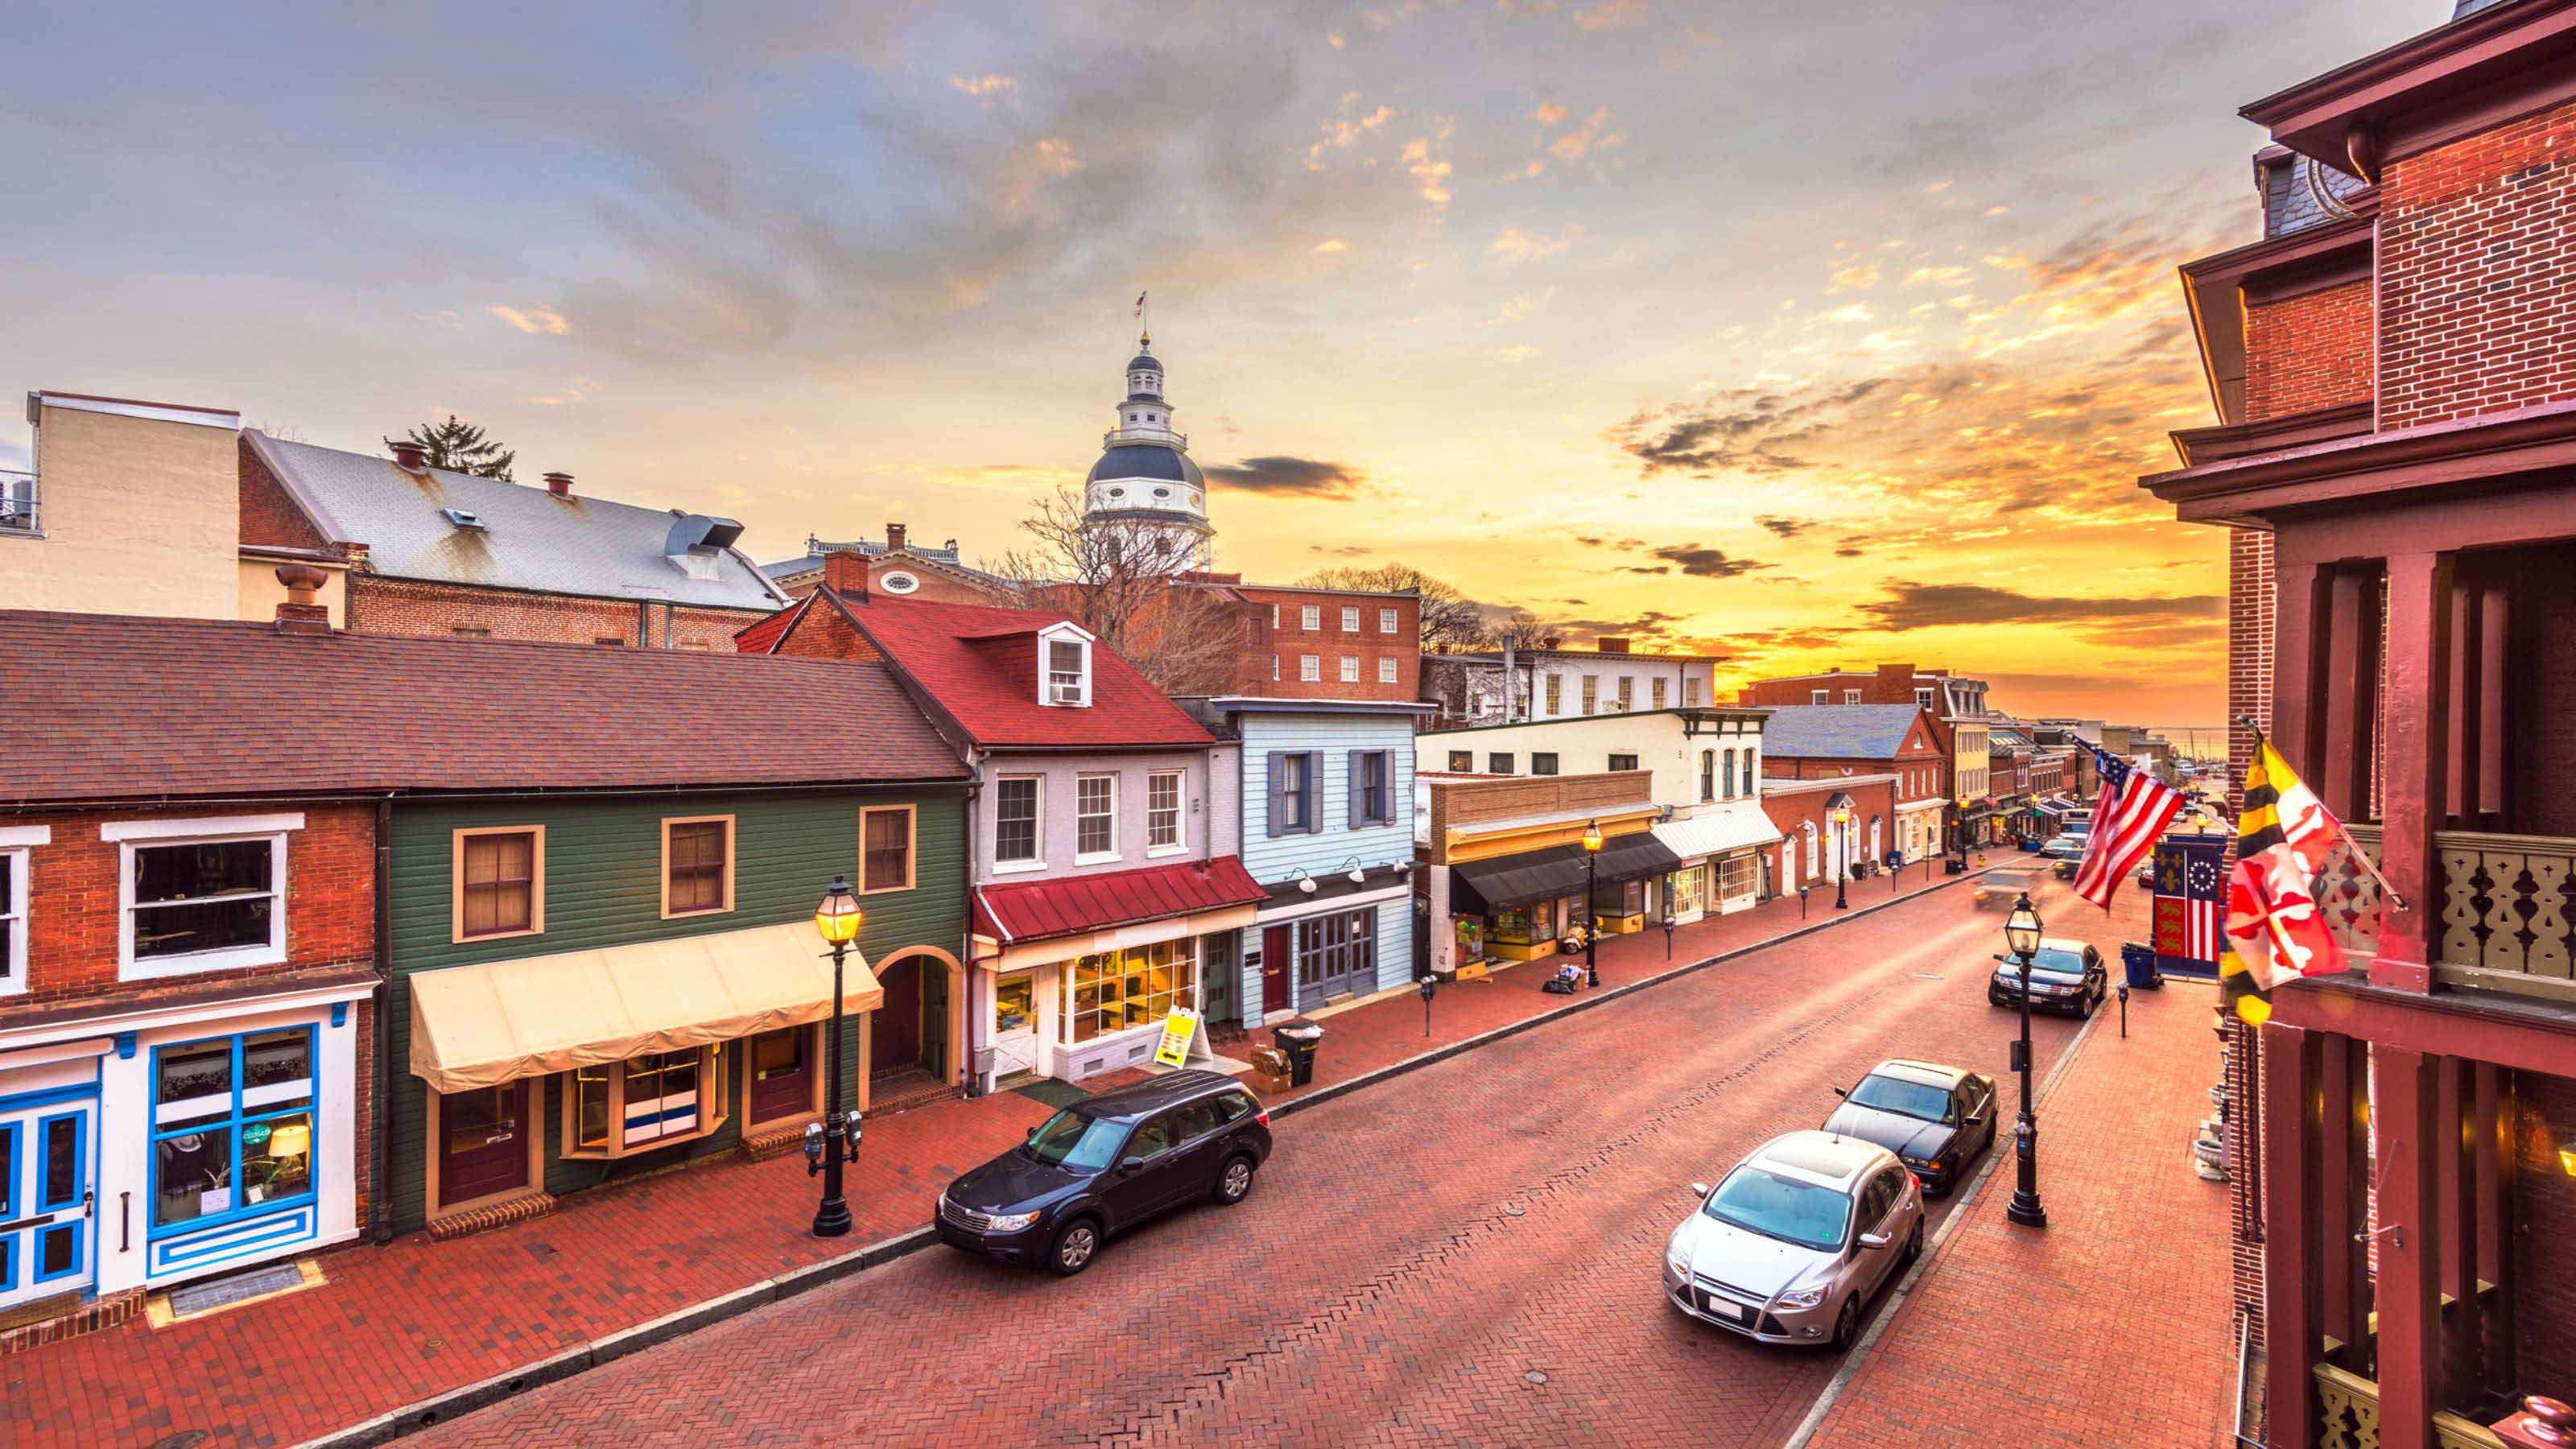 25 Small Towns With Big Millionaire Populations | Kiplinger